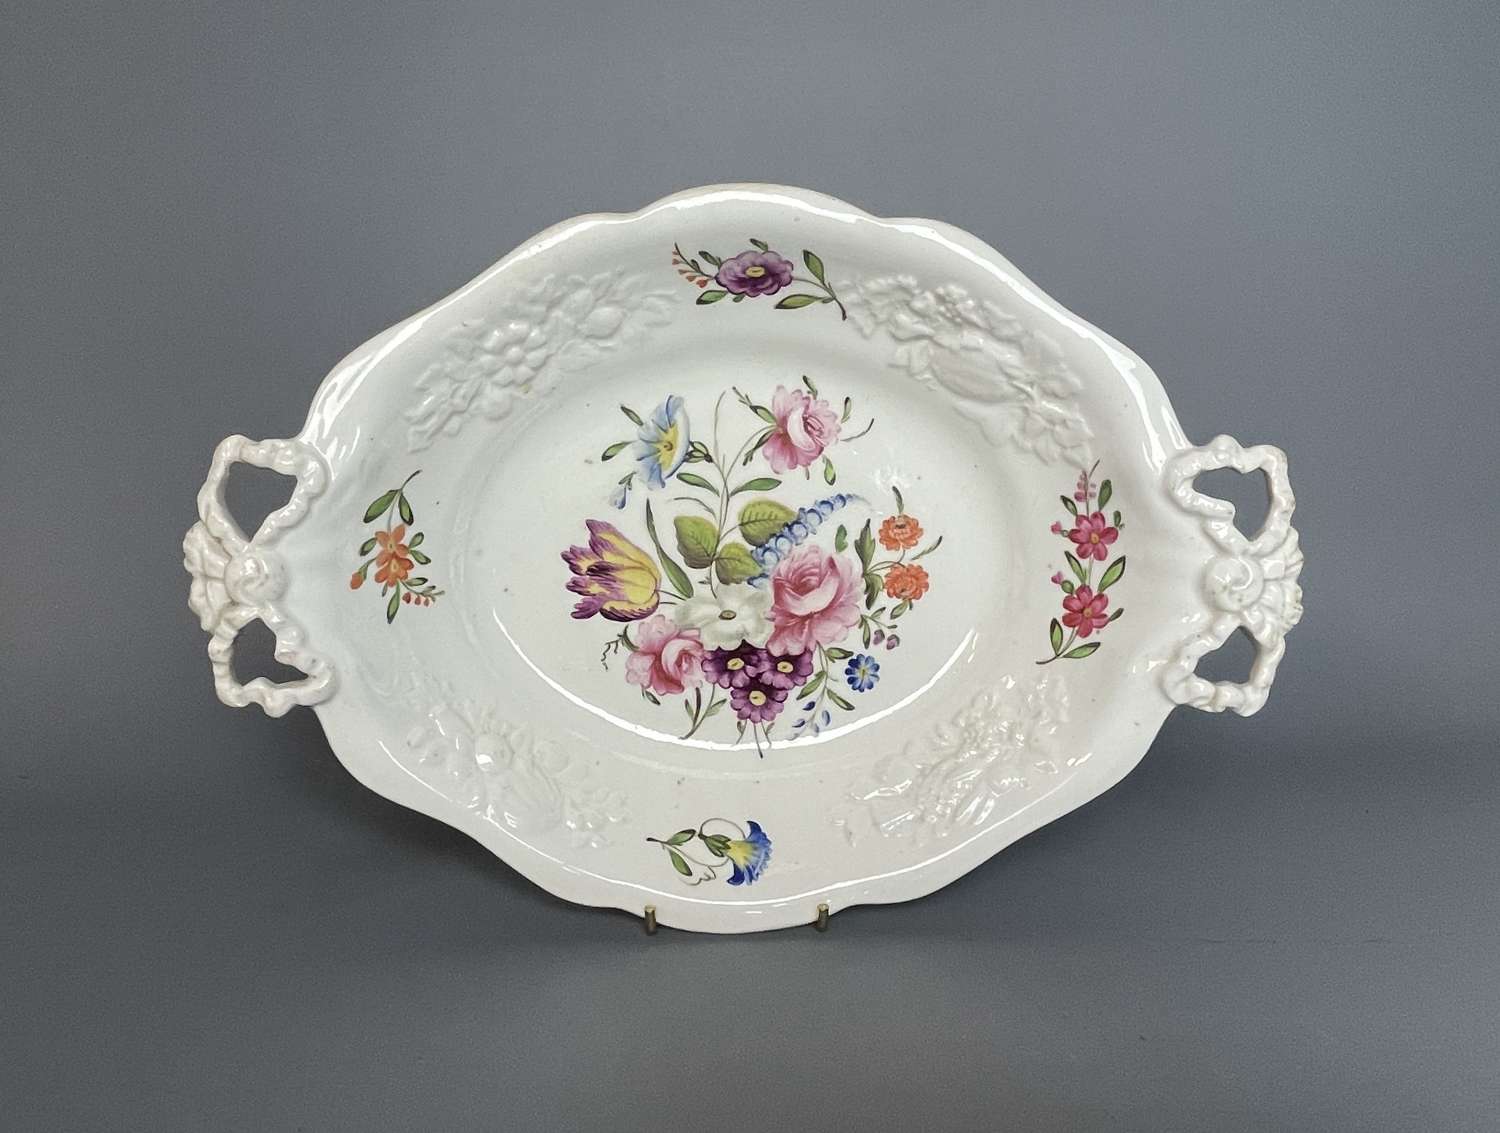 Victorian Floral Painted Staffordshire Porcelain Twin Handled Dish